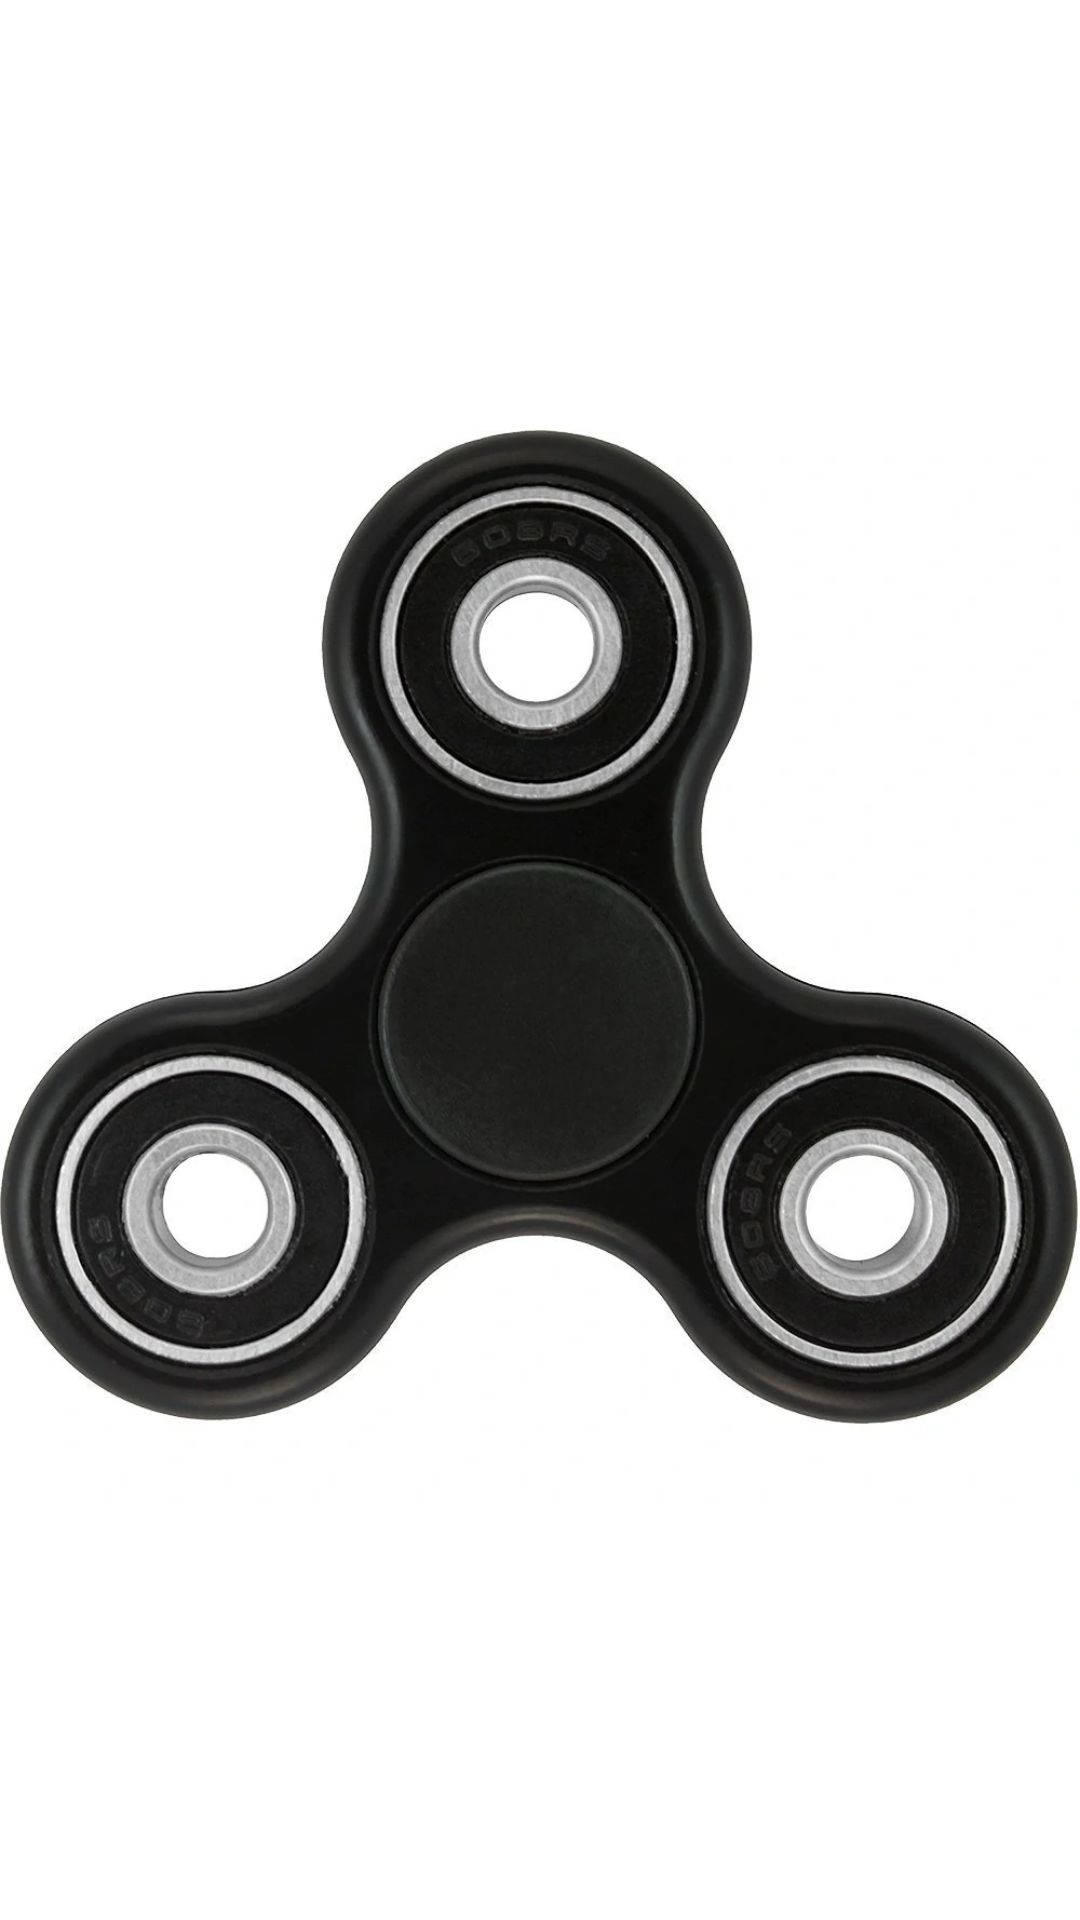 Relaxing With A Black Fidget Toy